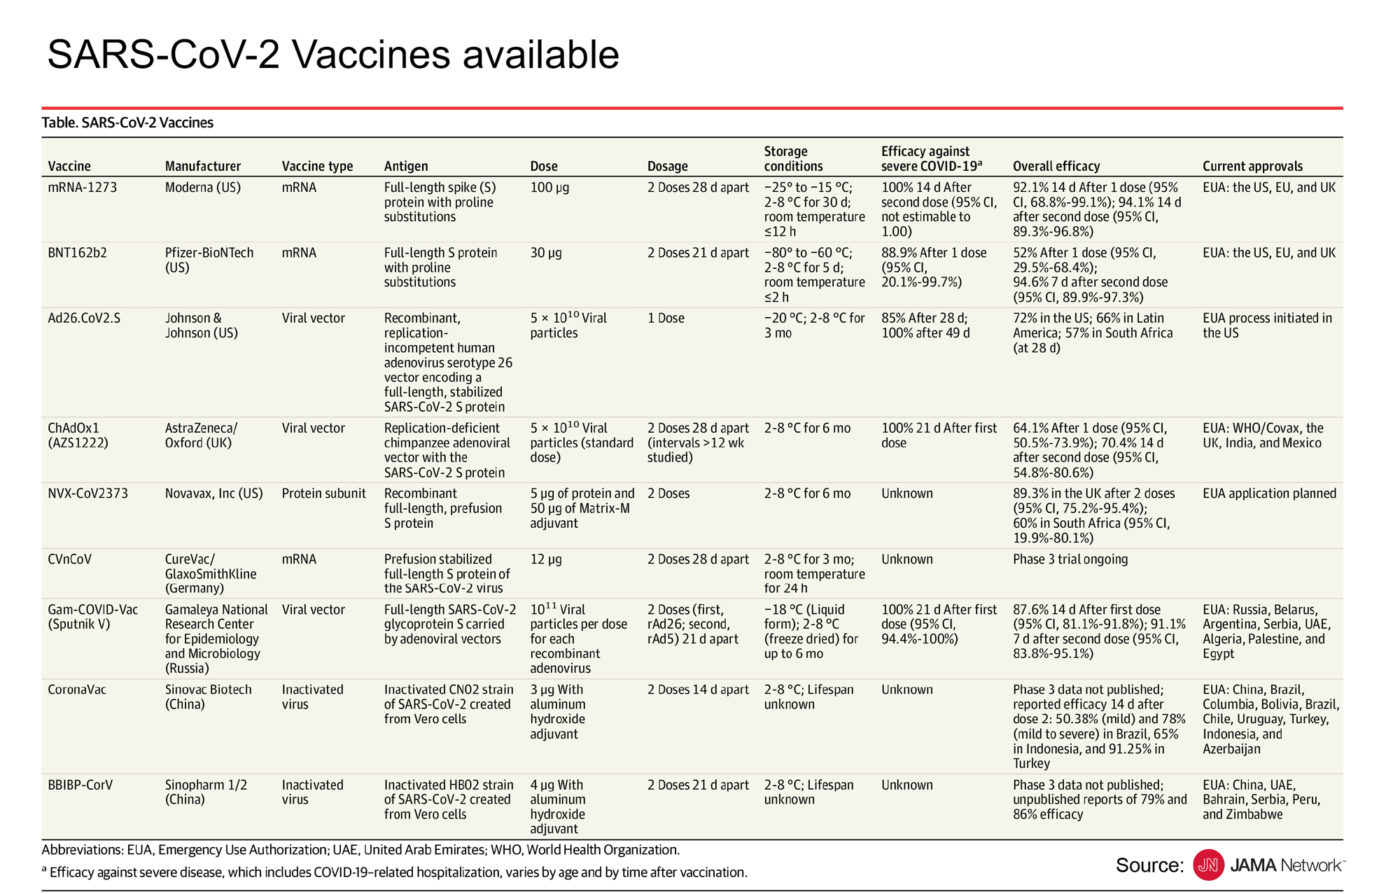 SARS-CoV-2 Vaccines available